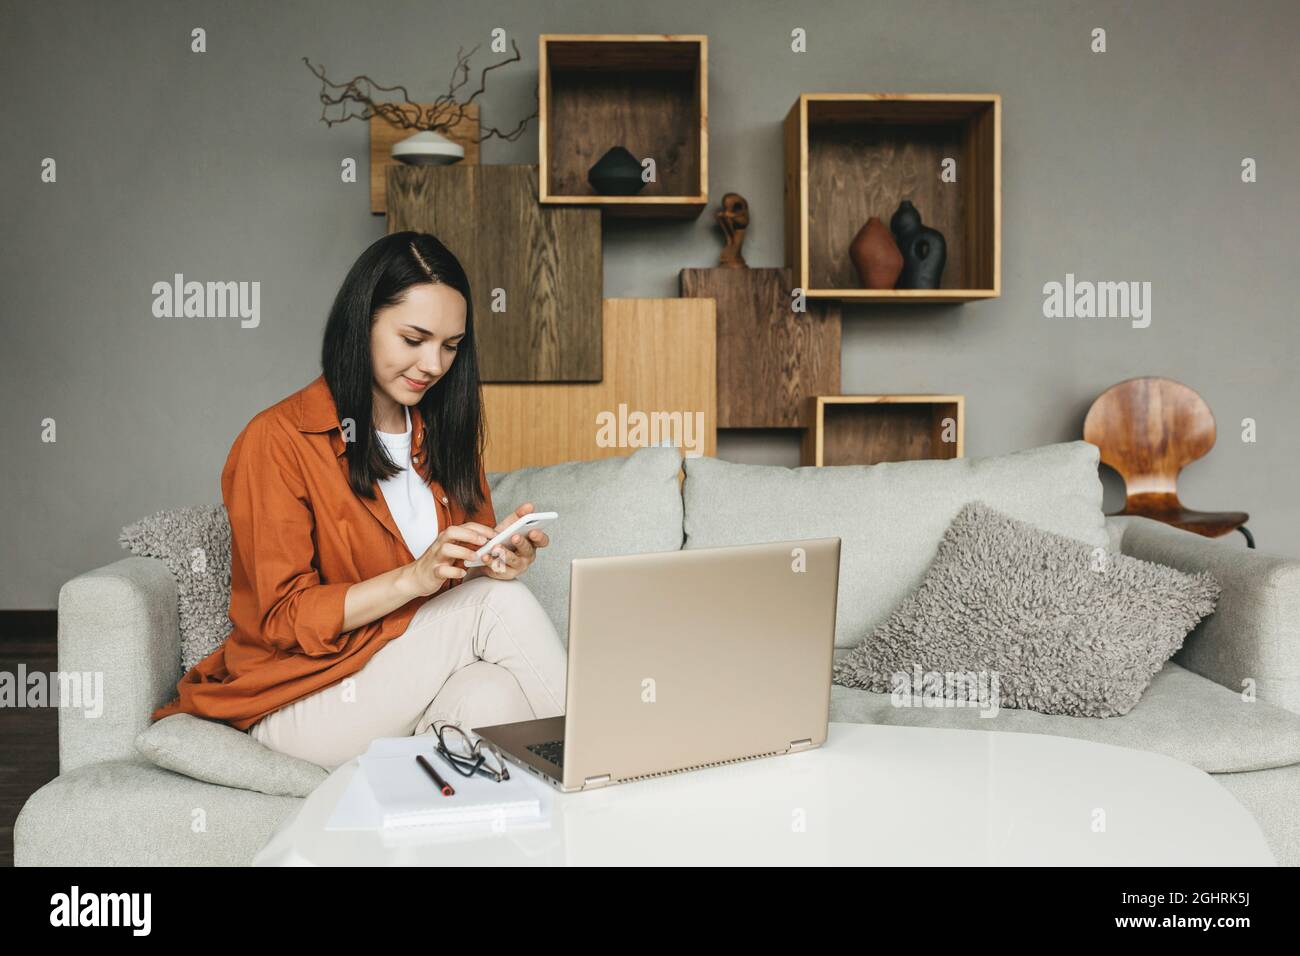 Work at home, video conference, video call for online meetings, virtual meetings, distance learning Stock Photo